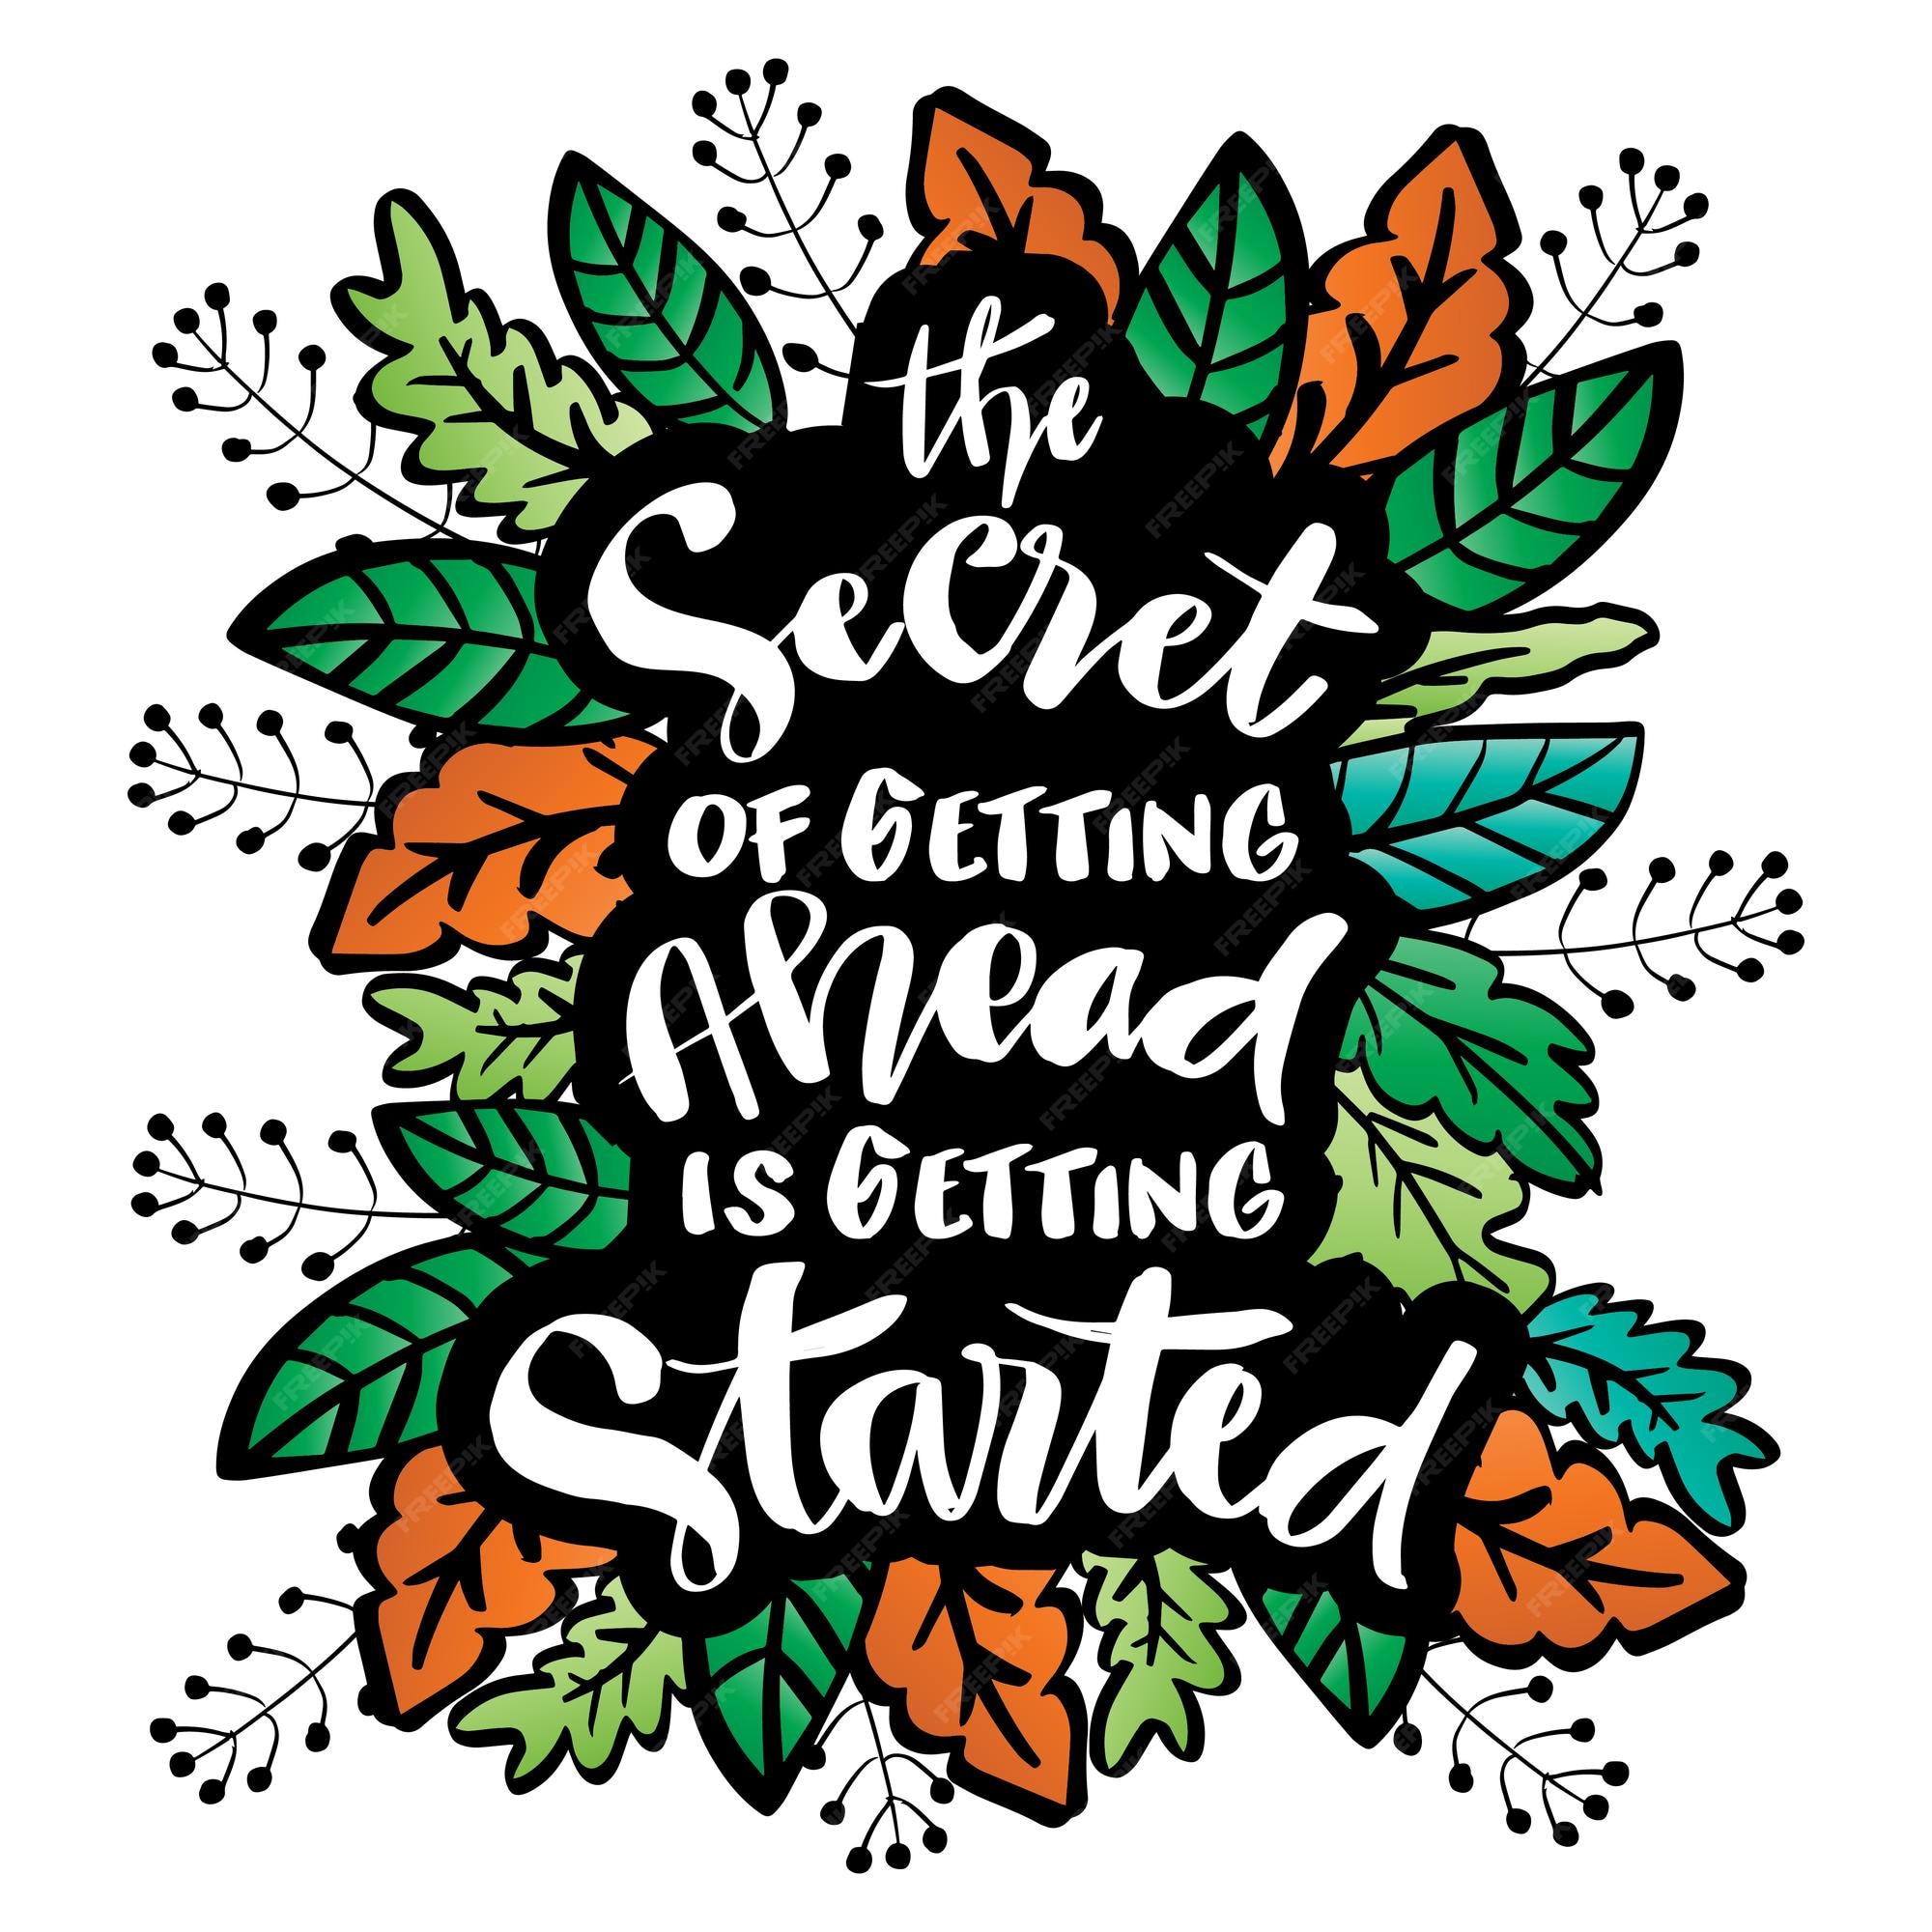 secret-getting-ahead-is-getting-started-motivational-quote_97378-1069.jpg